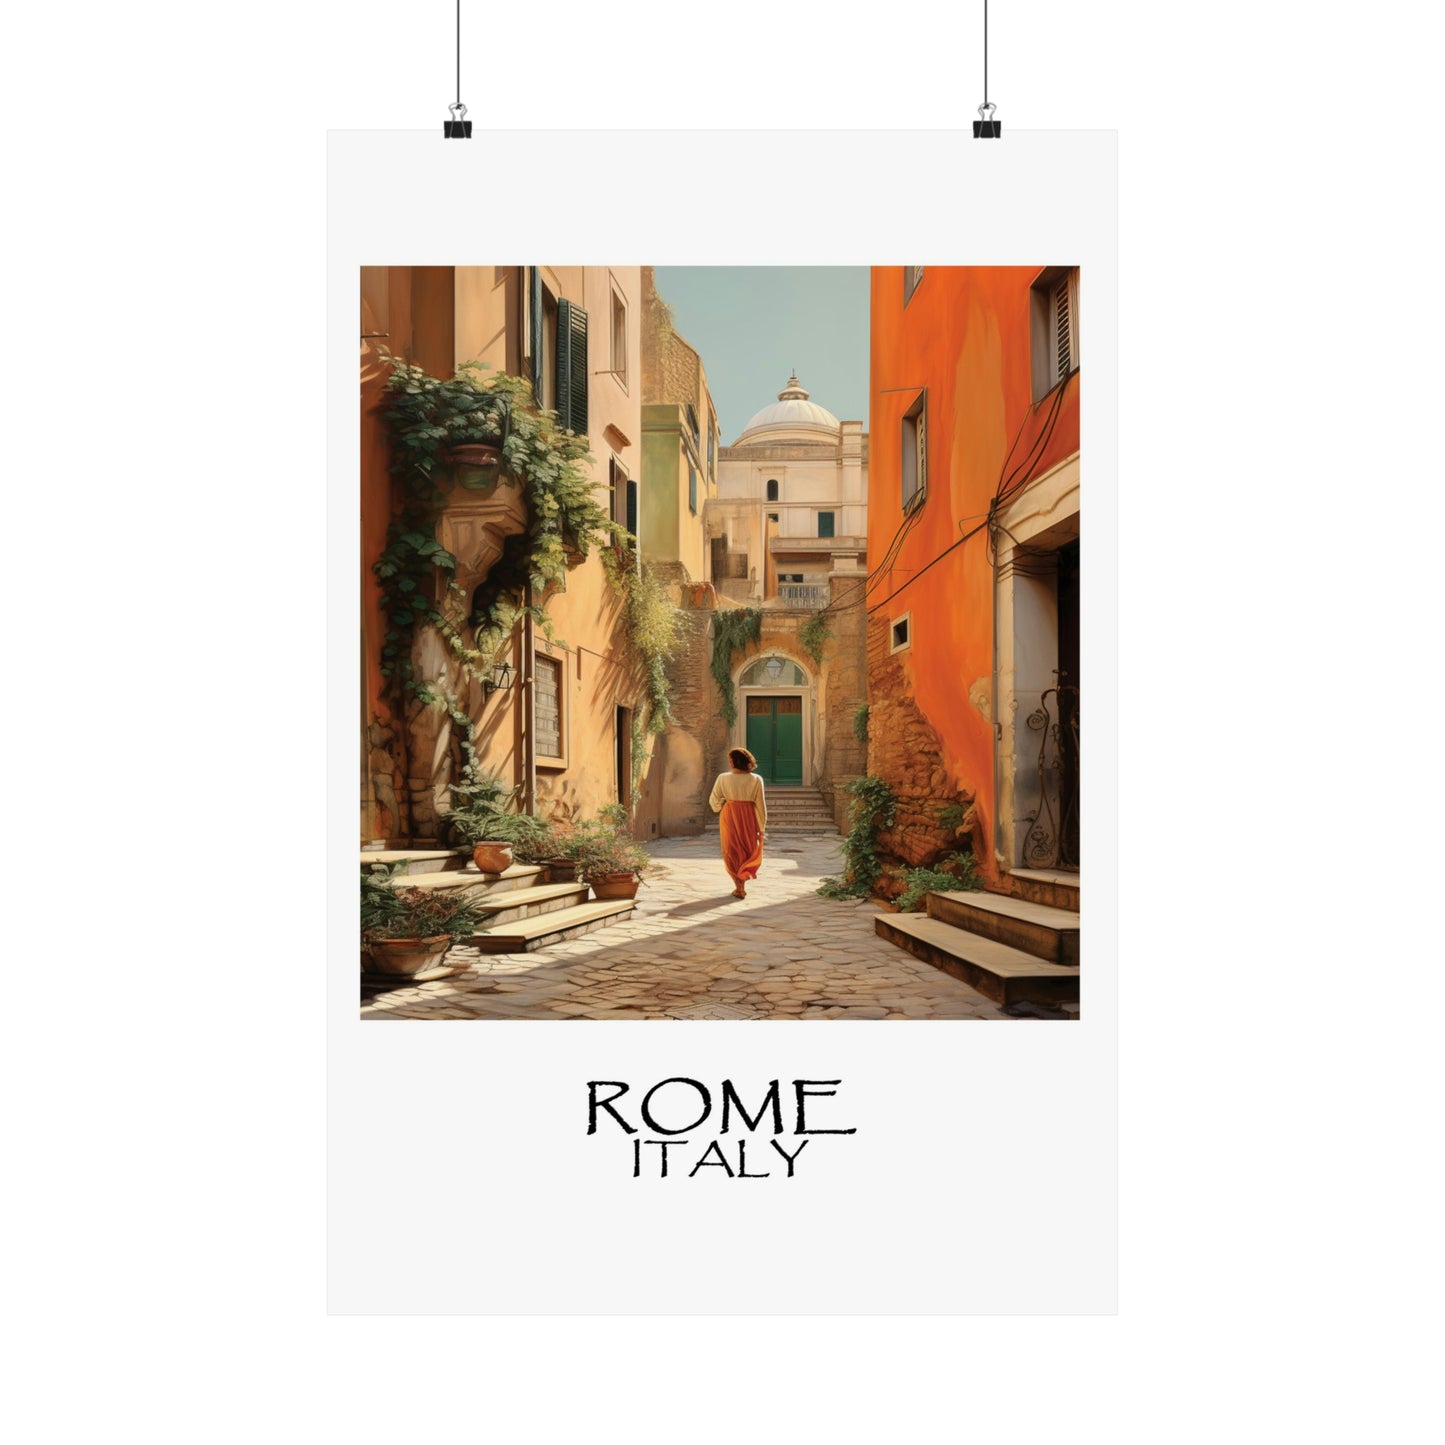 Unique Travel poster | Rome, Italy | Woman on a Sidestreet | 1920s Art Deco Wall Art | Retro Wall Art